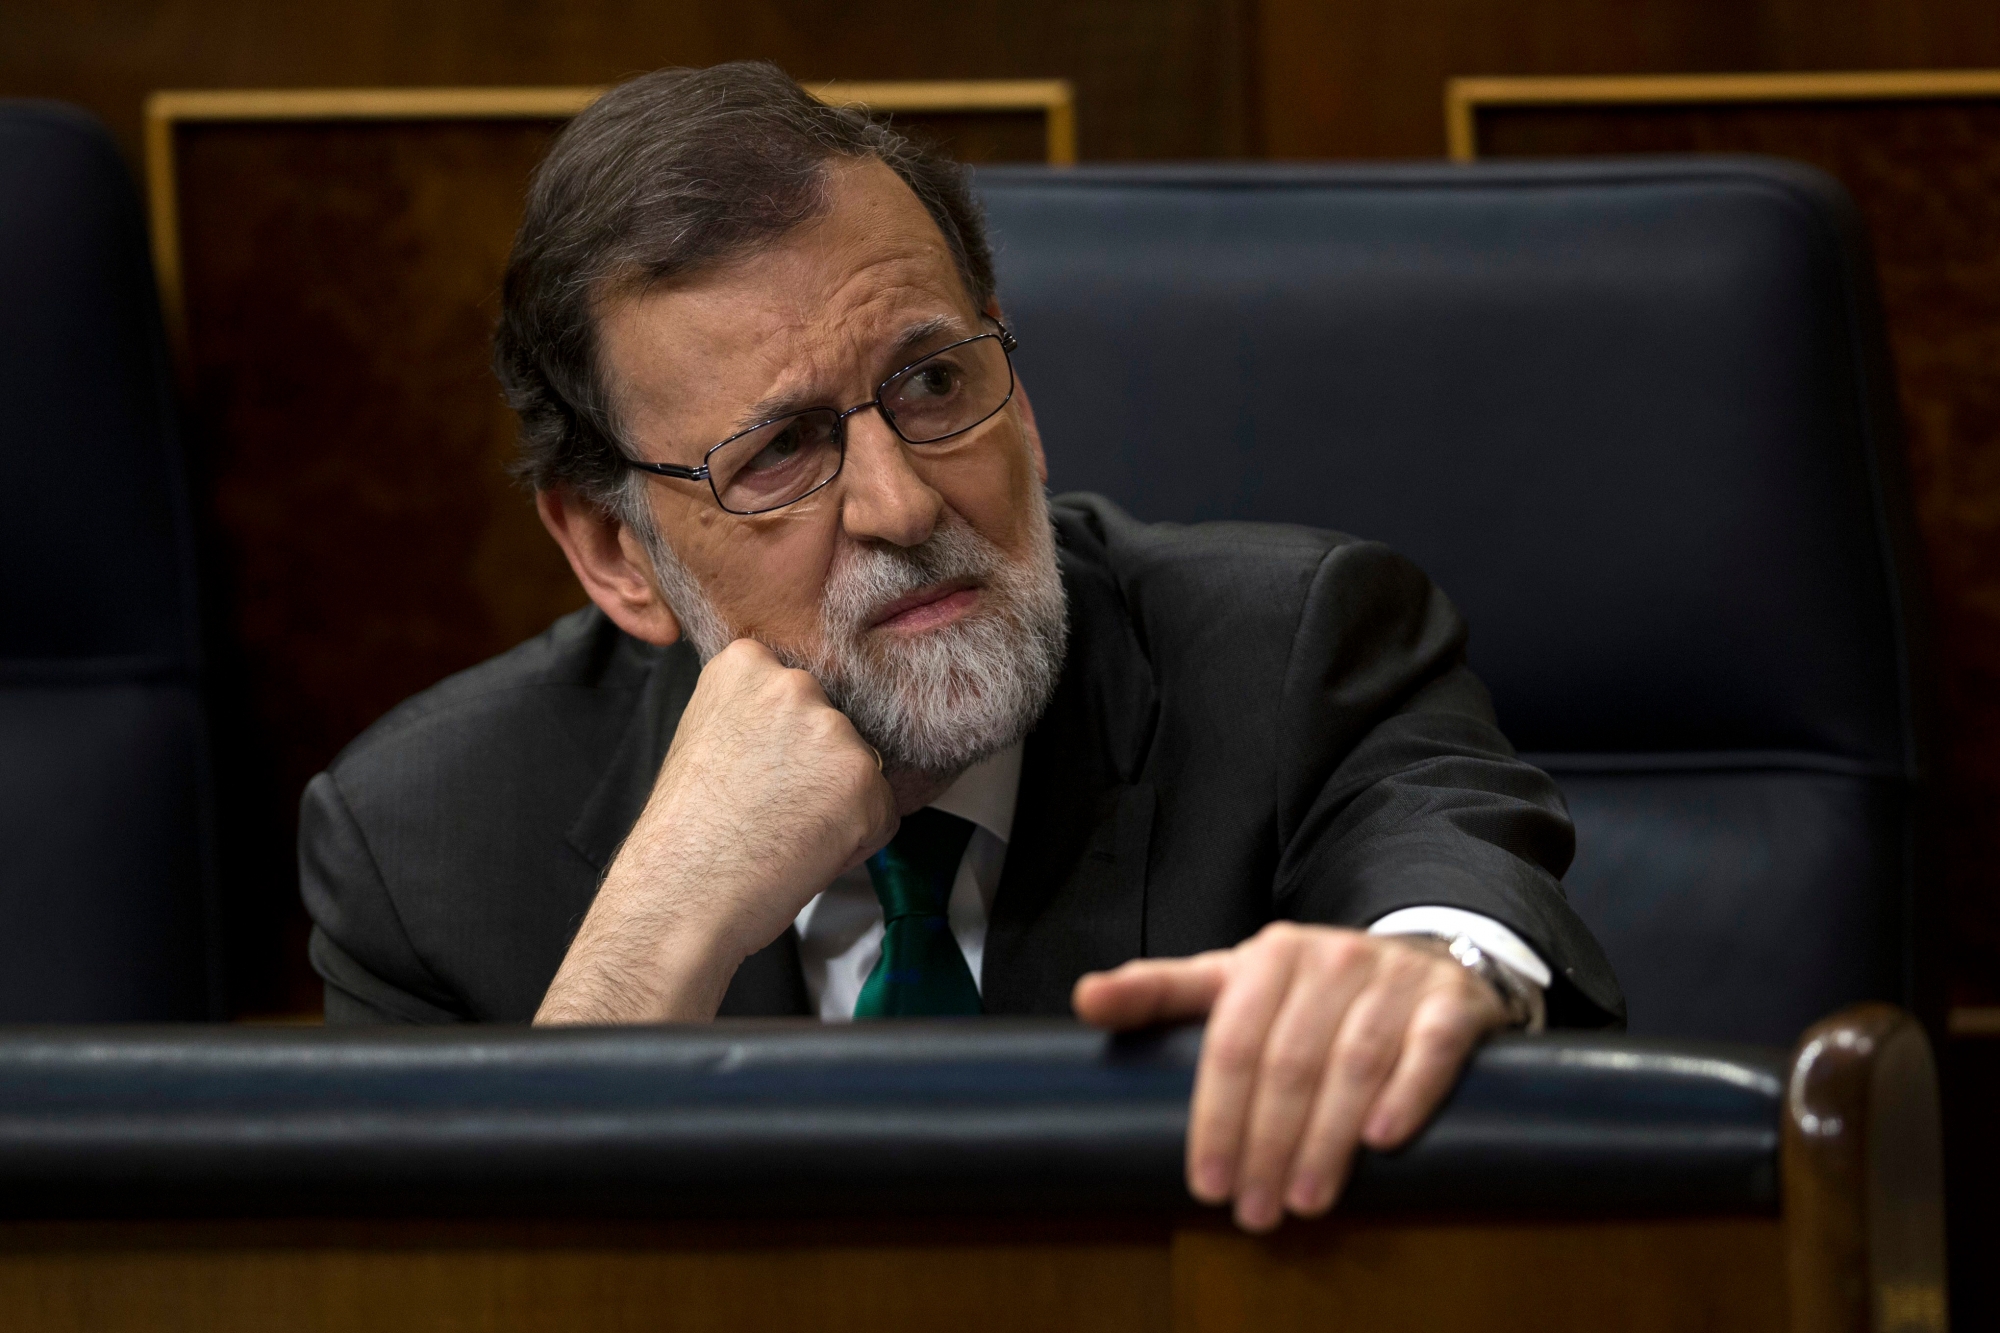 Spain's Prime Minister Mariano Rajoy and Popular Party leader listens to speeches during the first day of a motion of no confidence session at the Spanish parliament in Madrid, Thursday, May 31, 2018. The lower house of the Spanish parliament is debating whether to end Prime Minister Mariano Rajoy's close to eight years in power and supplant him with the leader of the Socialist opposition. (AP Photo/Francisco Seco) APTOPIX Spain Politics